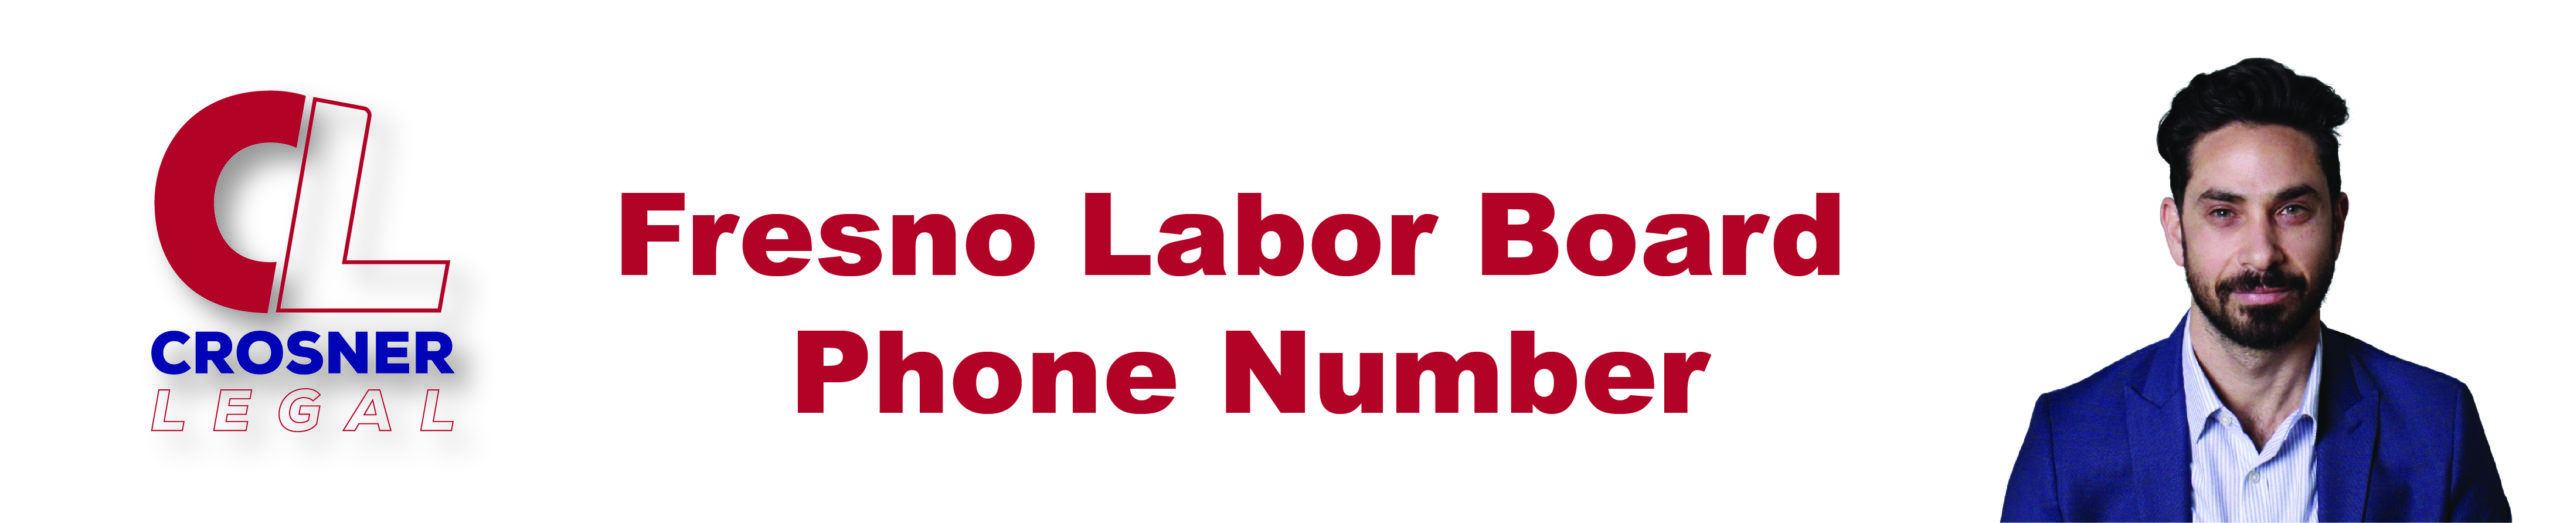 Fresno Labor Board Phone Number